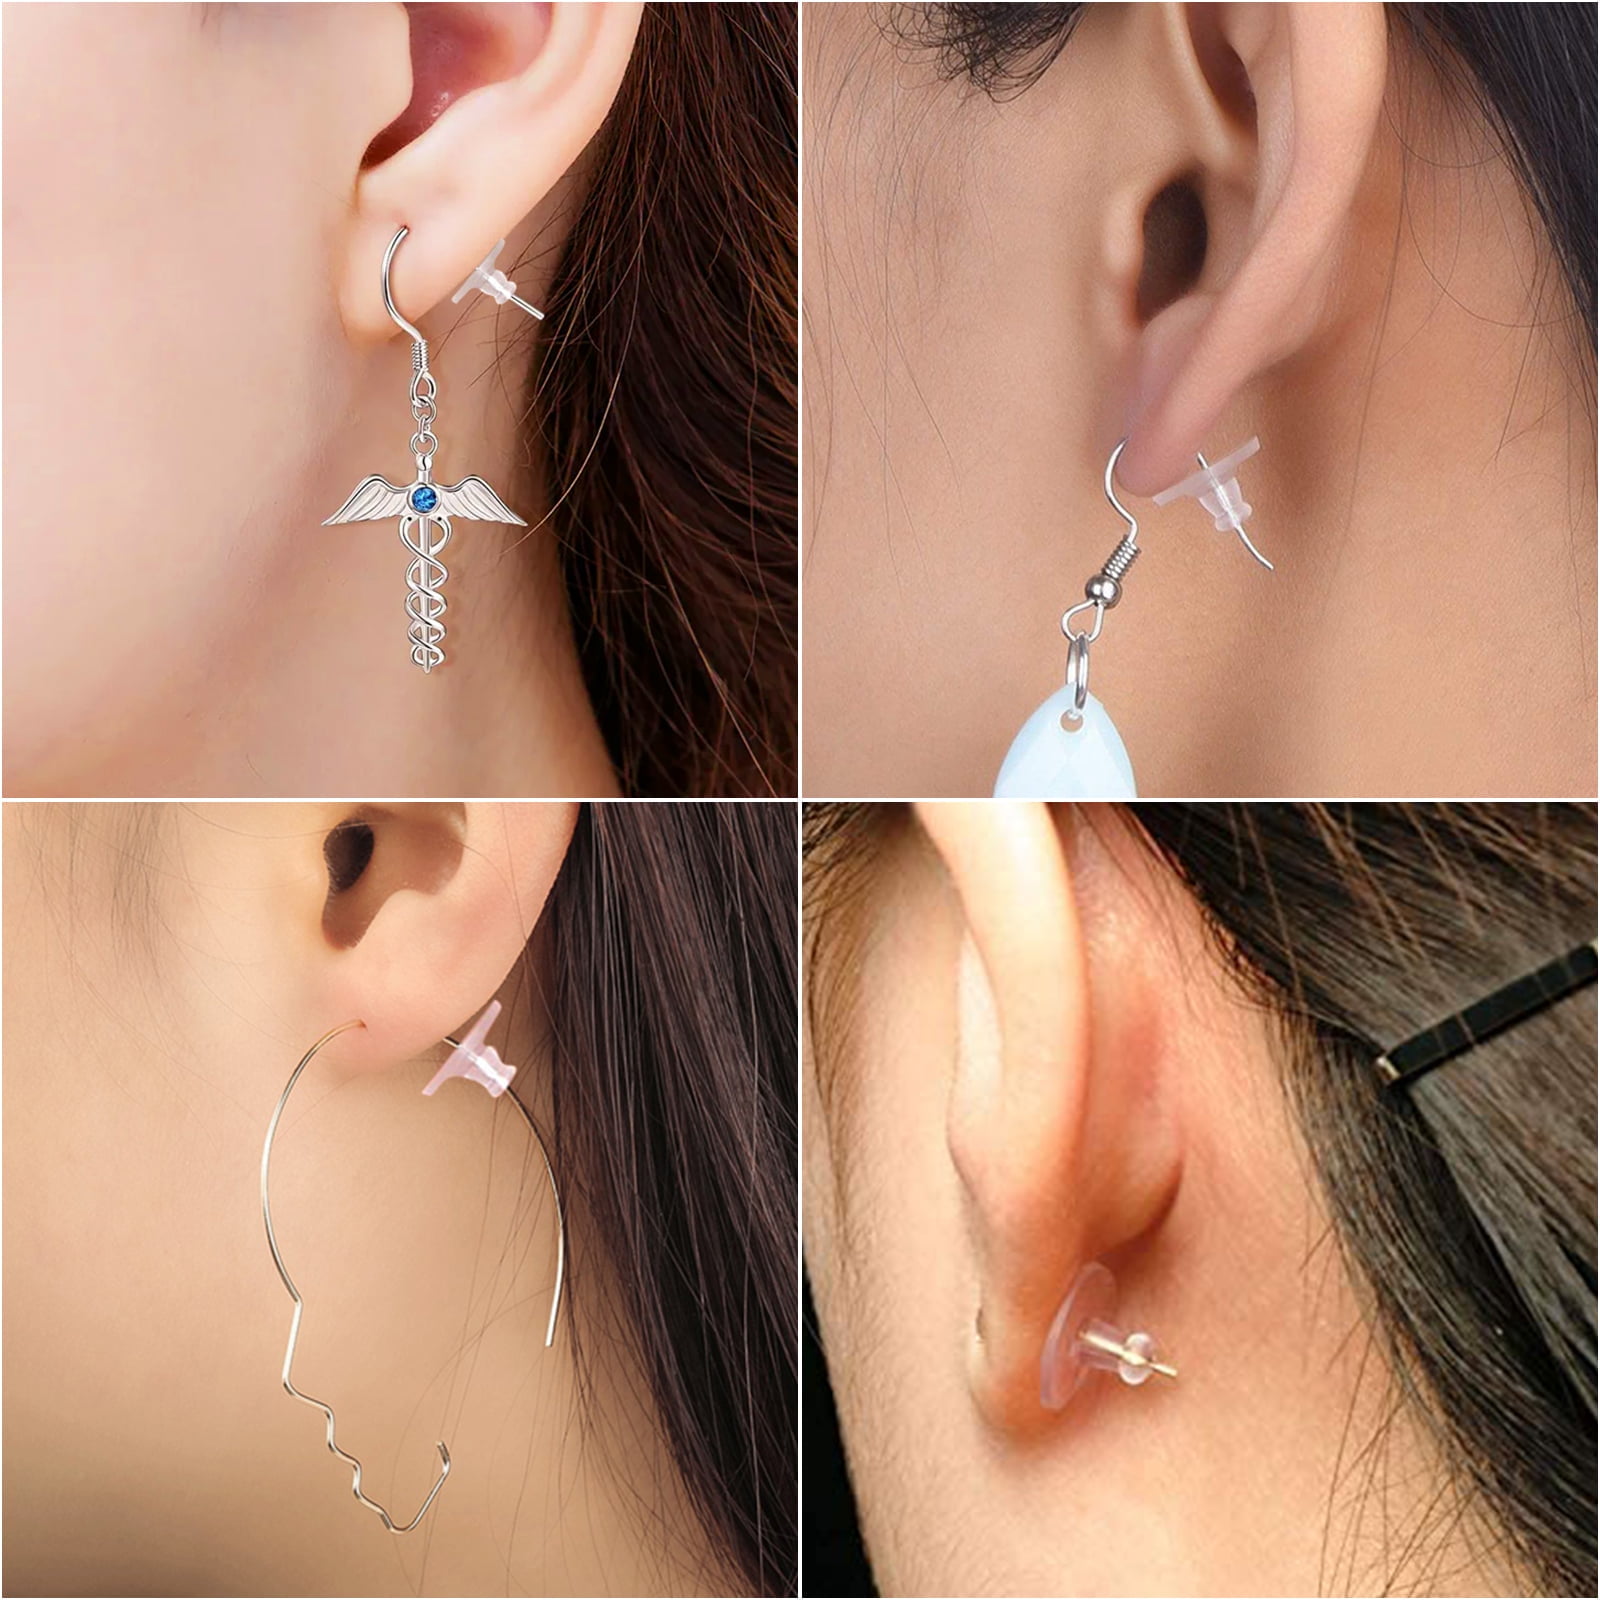 Super Z Outlet Plastic Earring Backs Replacements Comfortable Ear Nut Clear/Silver Safety Hypoallergenic (100 Pack)